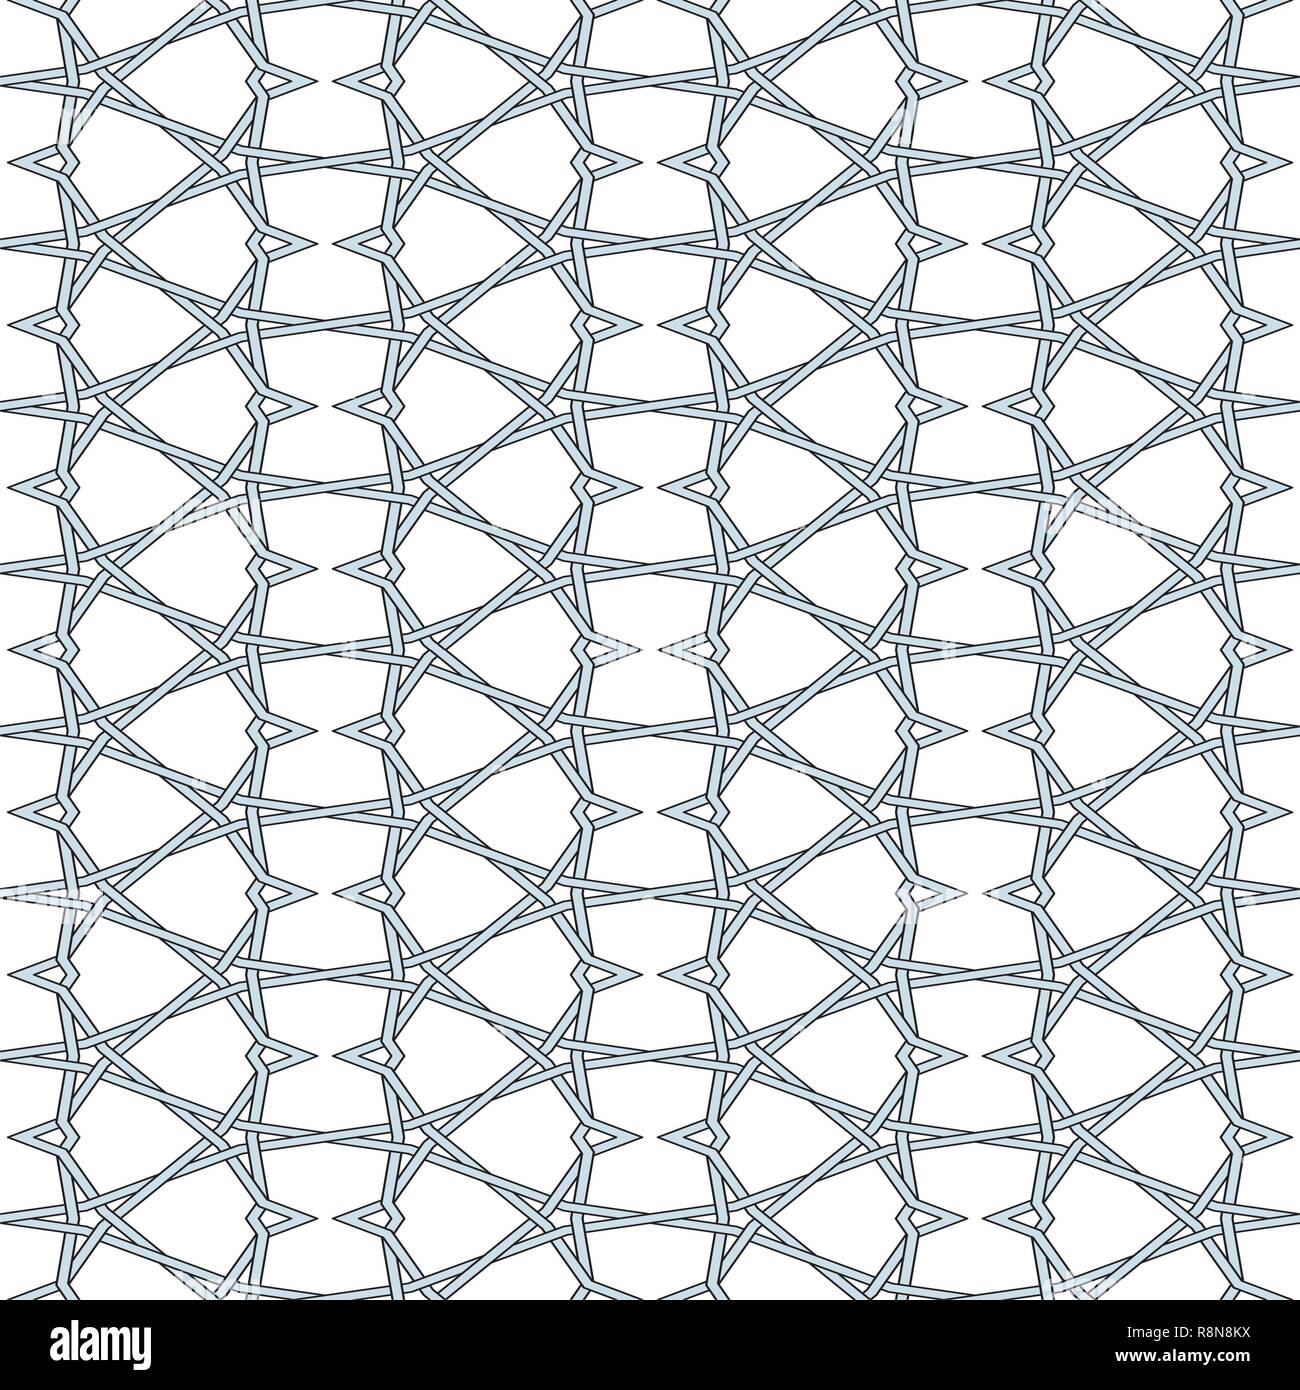 Knitted Wire Seamless Pattern Background Stock Vector